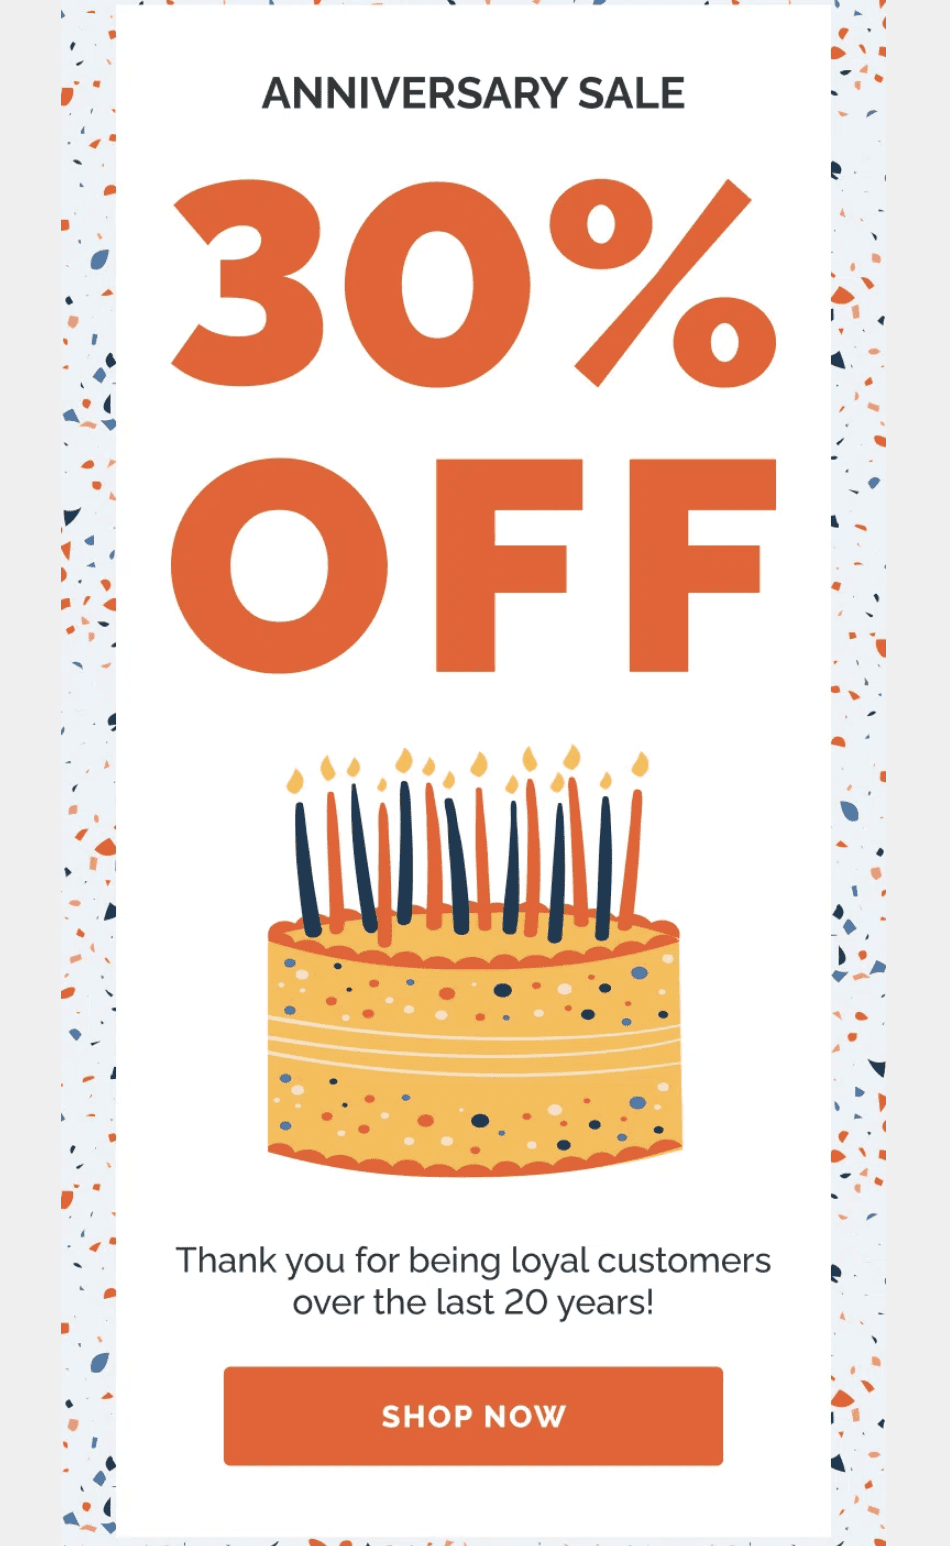 Anniversary email campaign for loyal customers